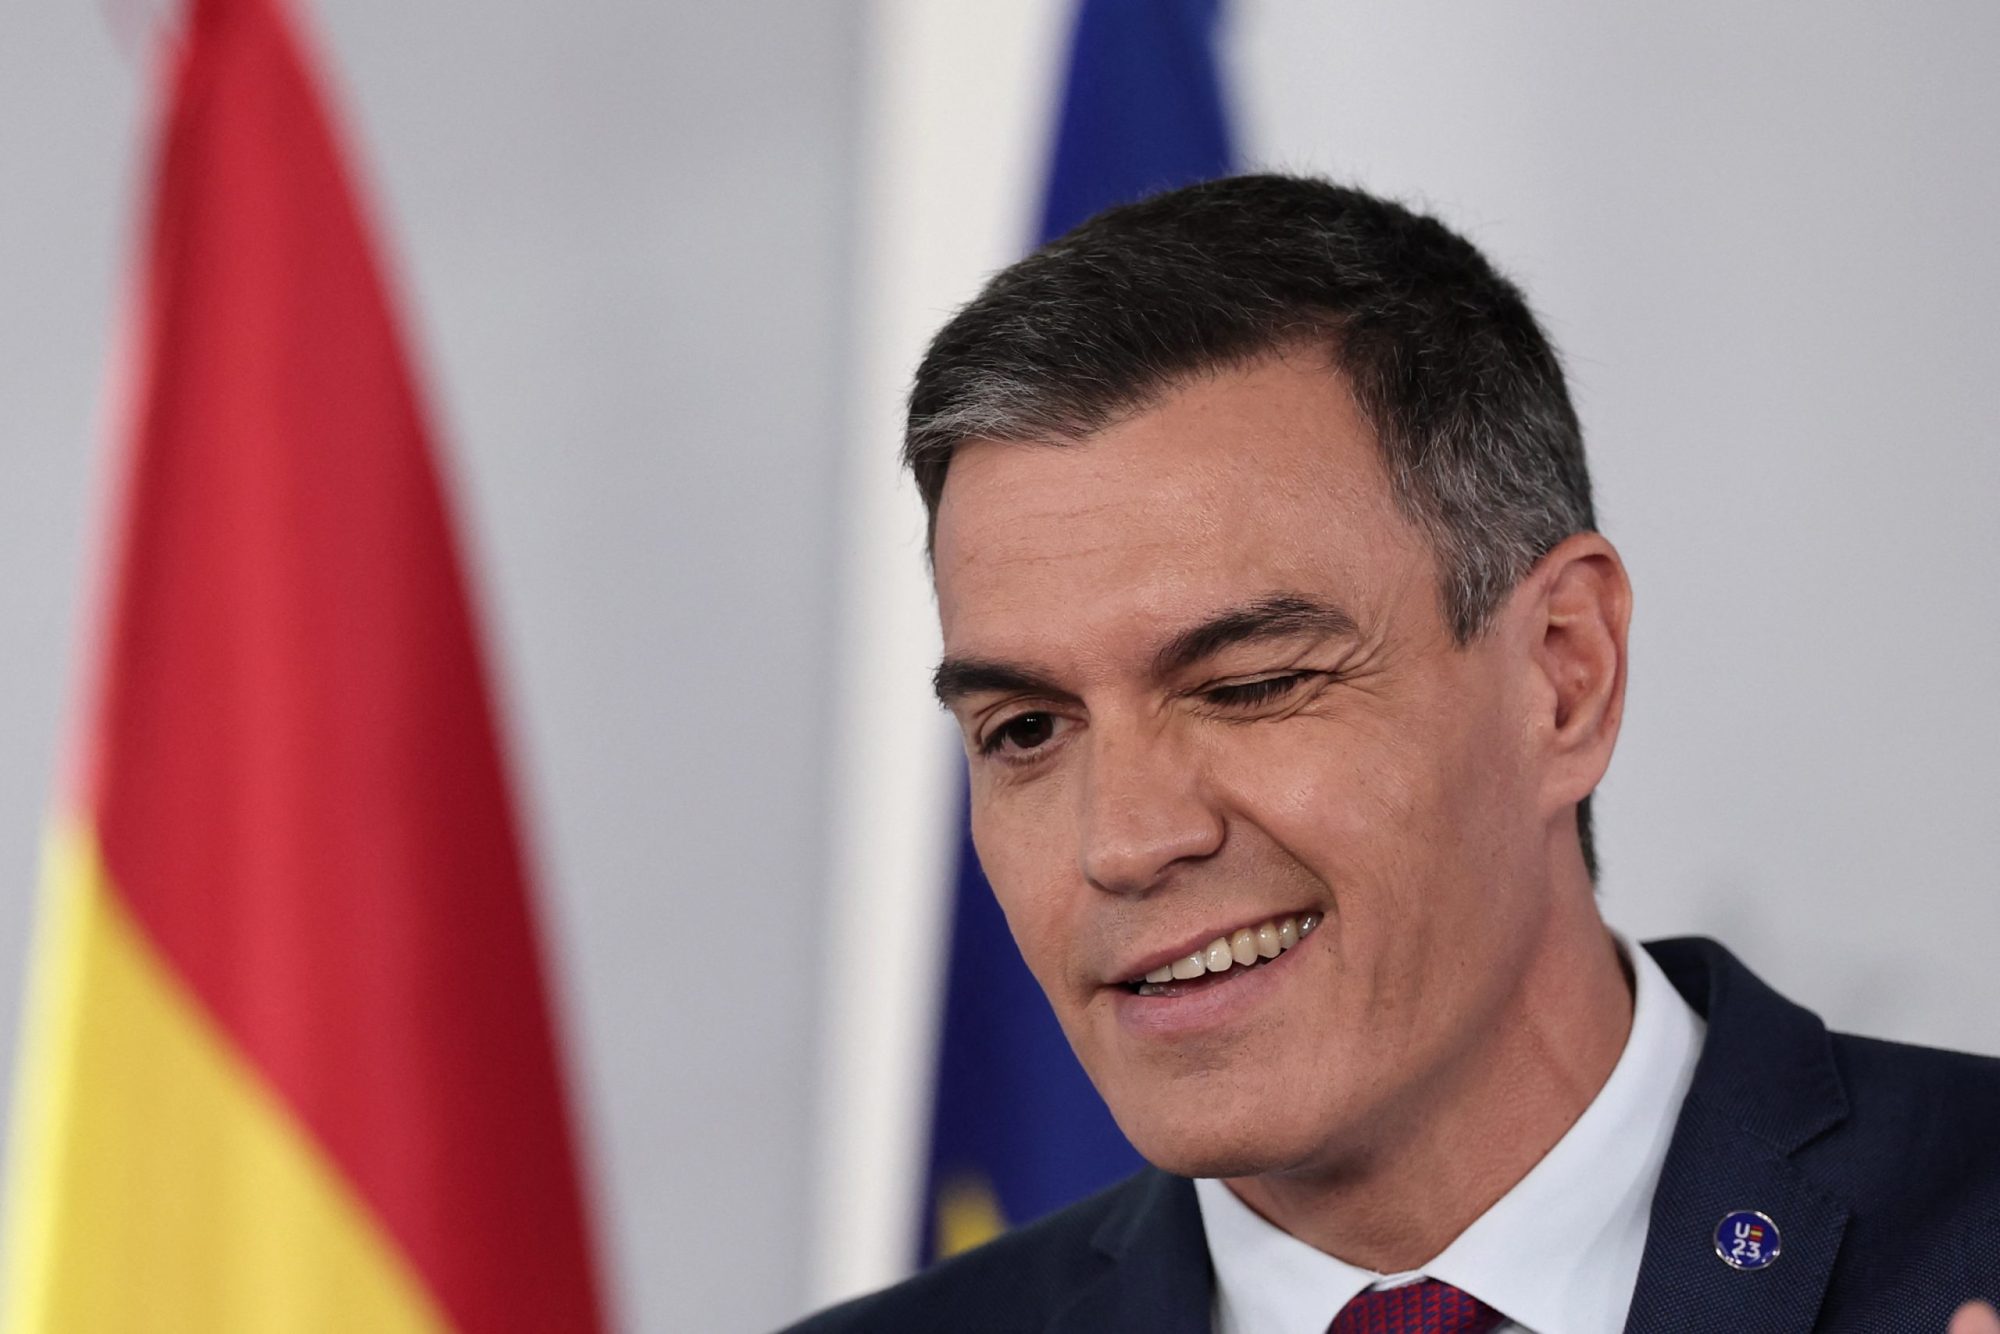 Spain's acting Prime Minister Pedro Sanchez gestures as he delivers a speech at La Moncloa Palace in Madrid on October 3, 2023 after meeting King Felipe VI as part of consultations aiming at proposing a new candidate for investiture. Photo by THOMAS COEX/AFP via Getty Images